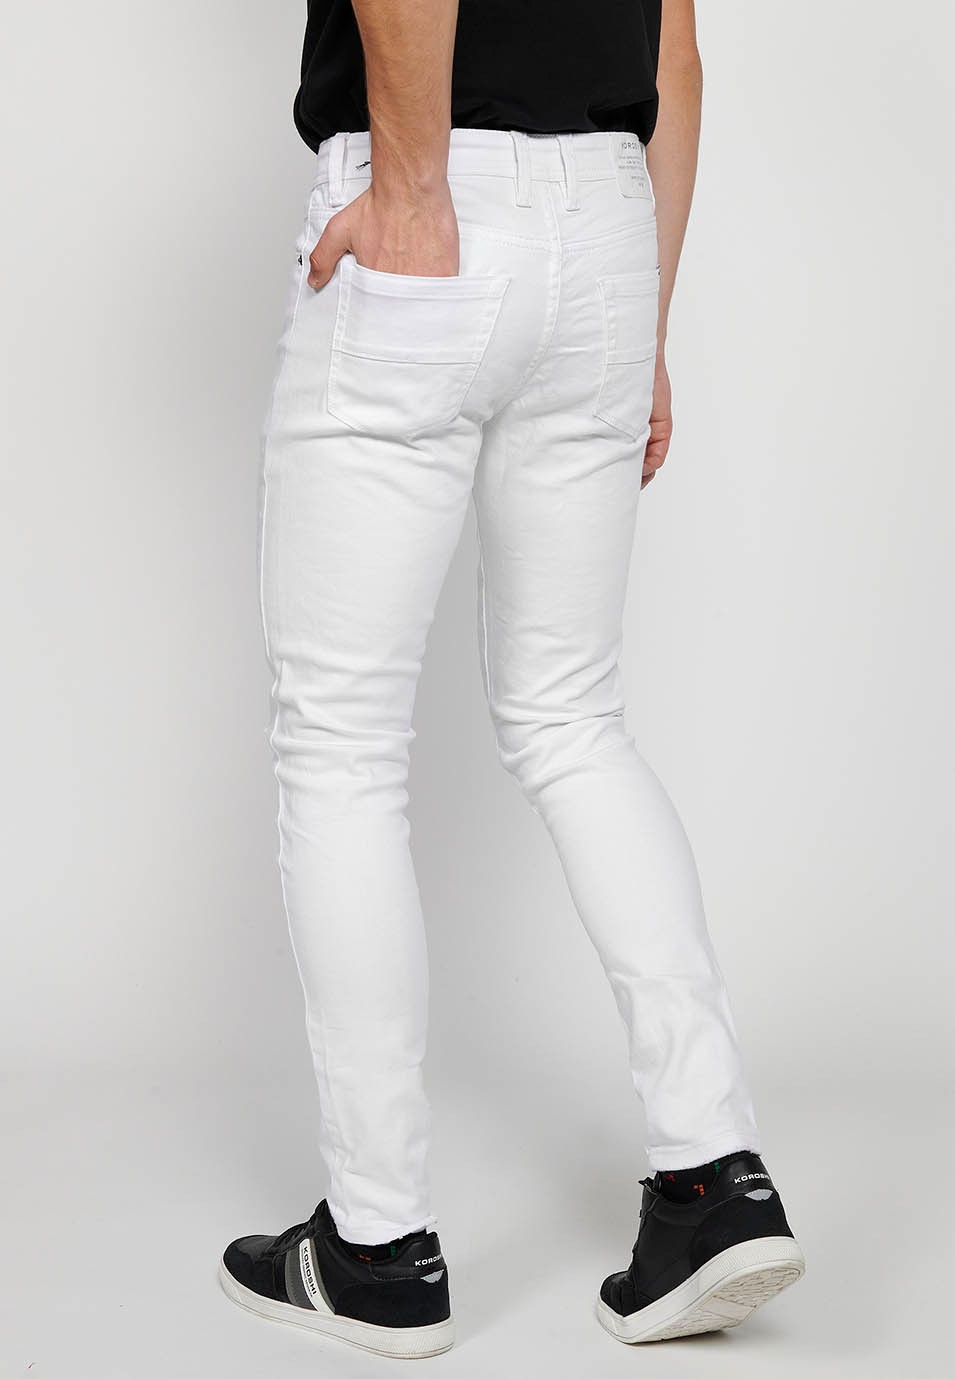 Super skinny jeans with front closure with zipper and button in White Denim for Men 2